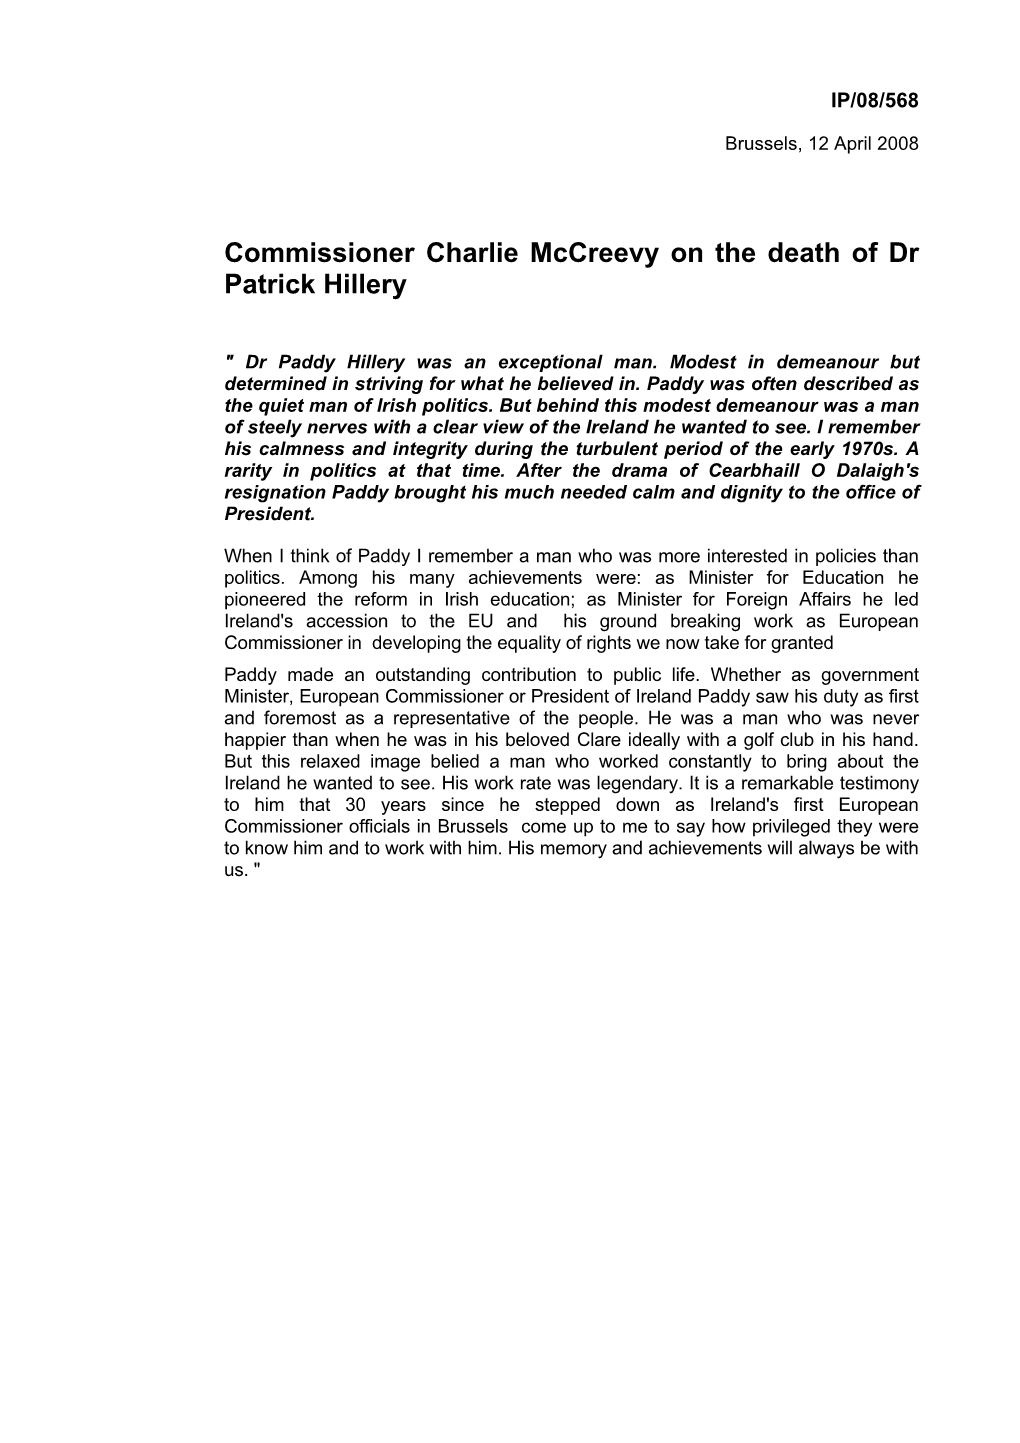 Commissioner Charlie Mccreevy on the Death of Dr Patrick Hillery